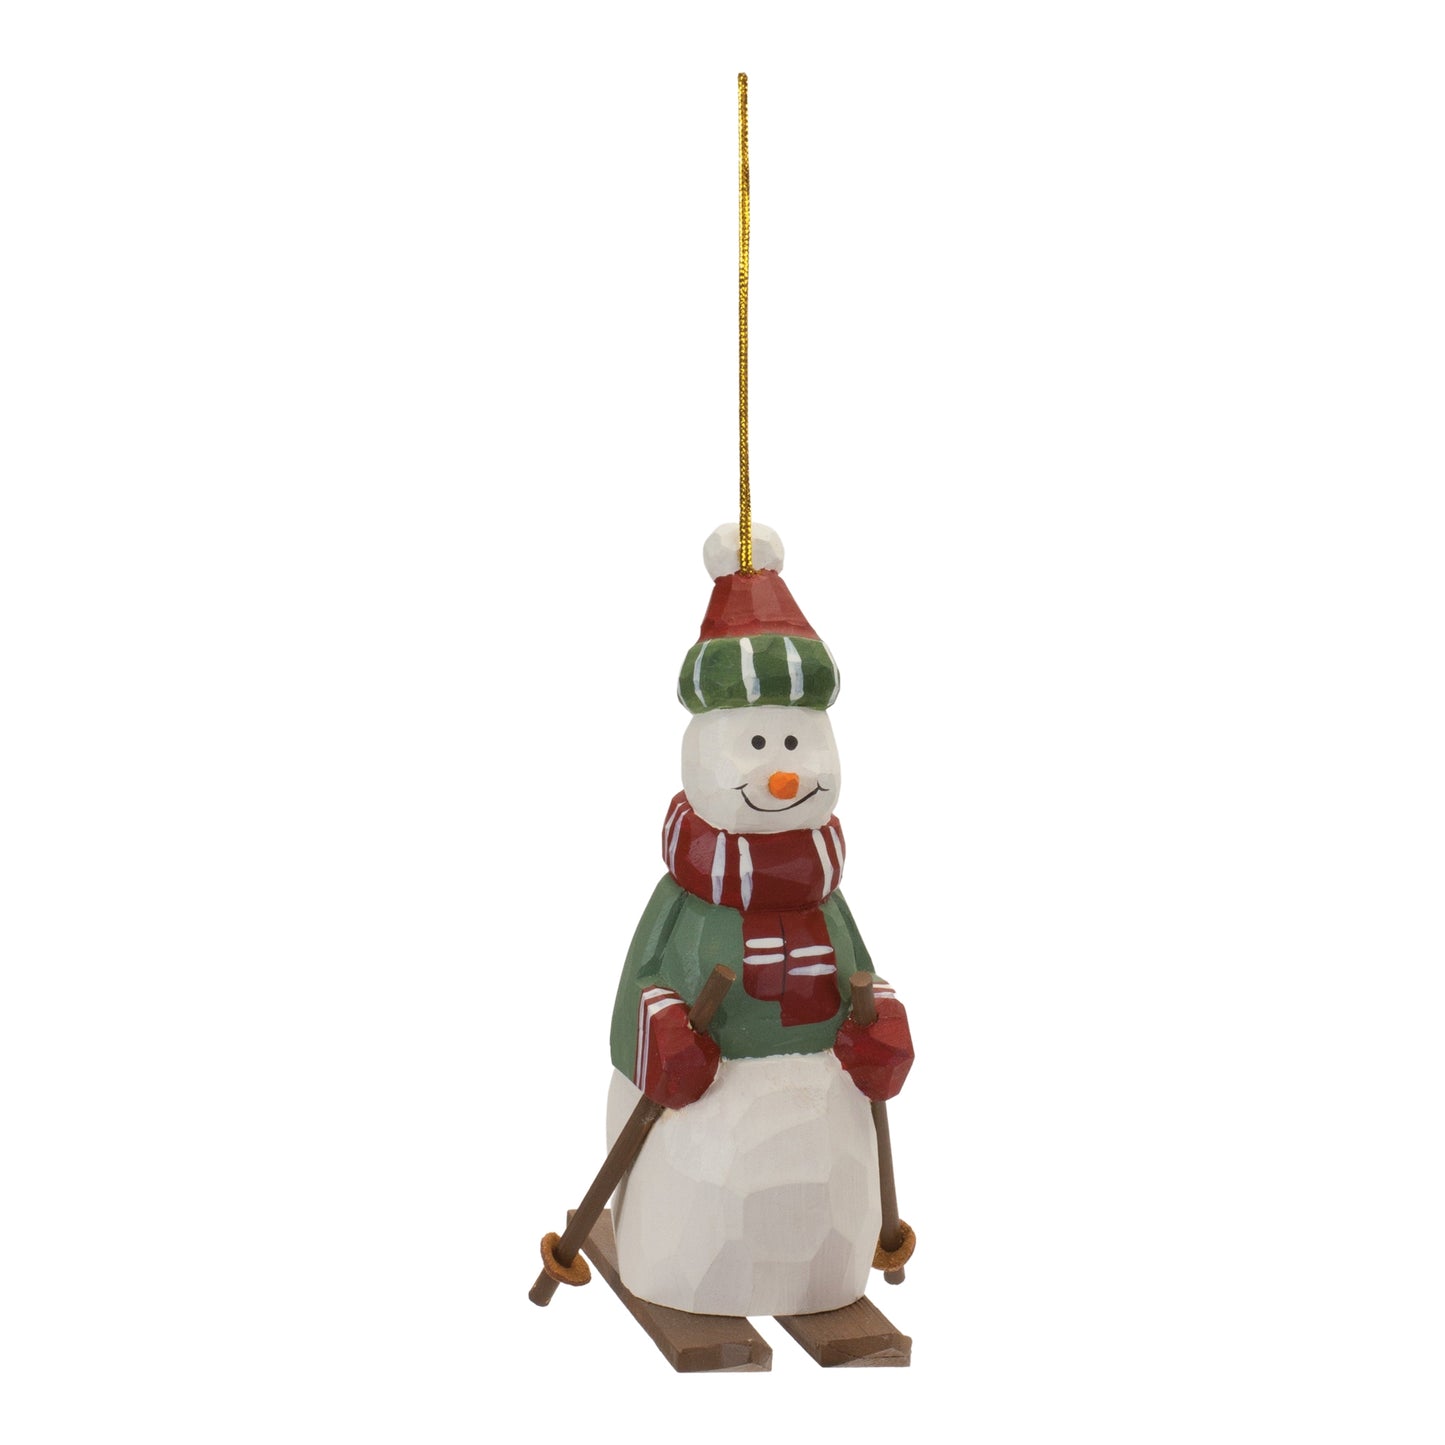 Wooden Snowman On Skis Ornament Set Of 6